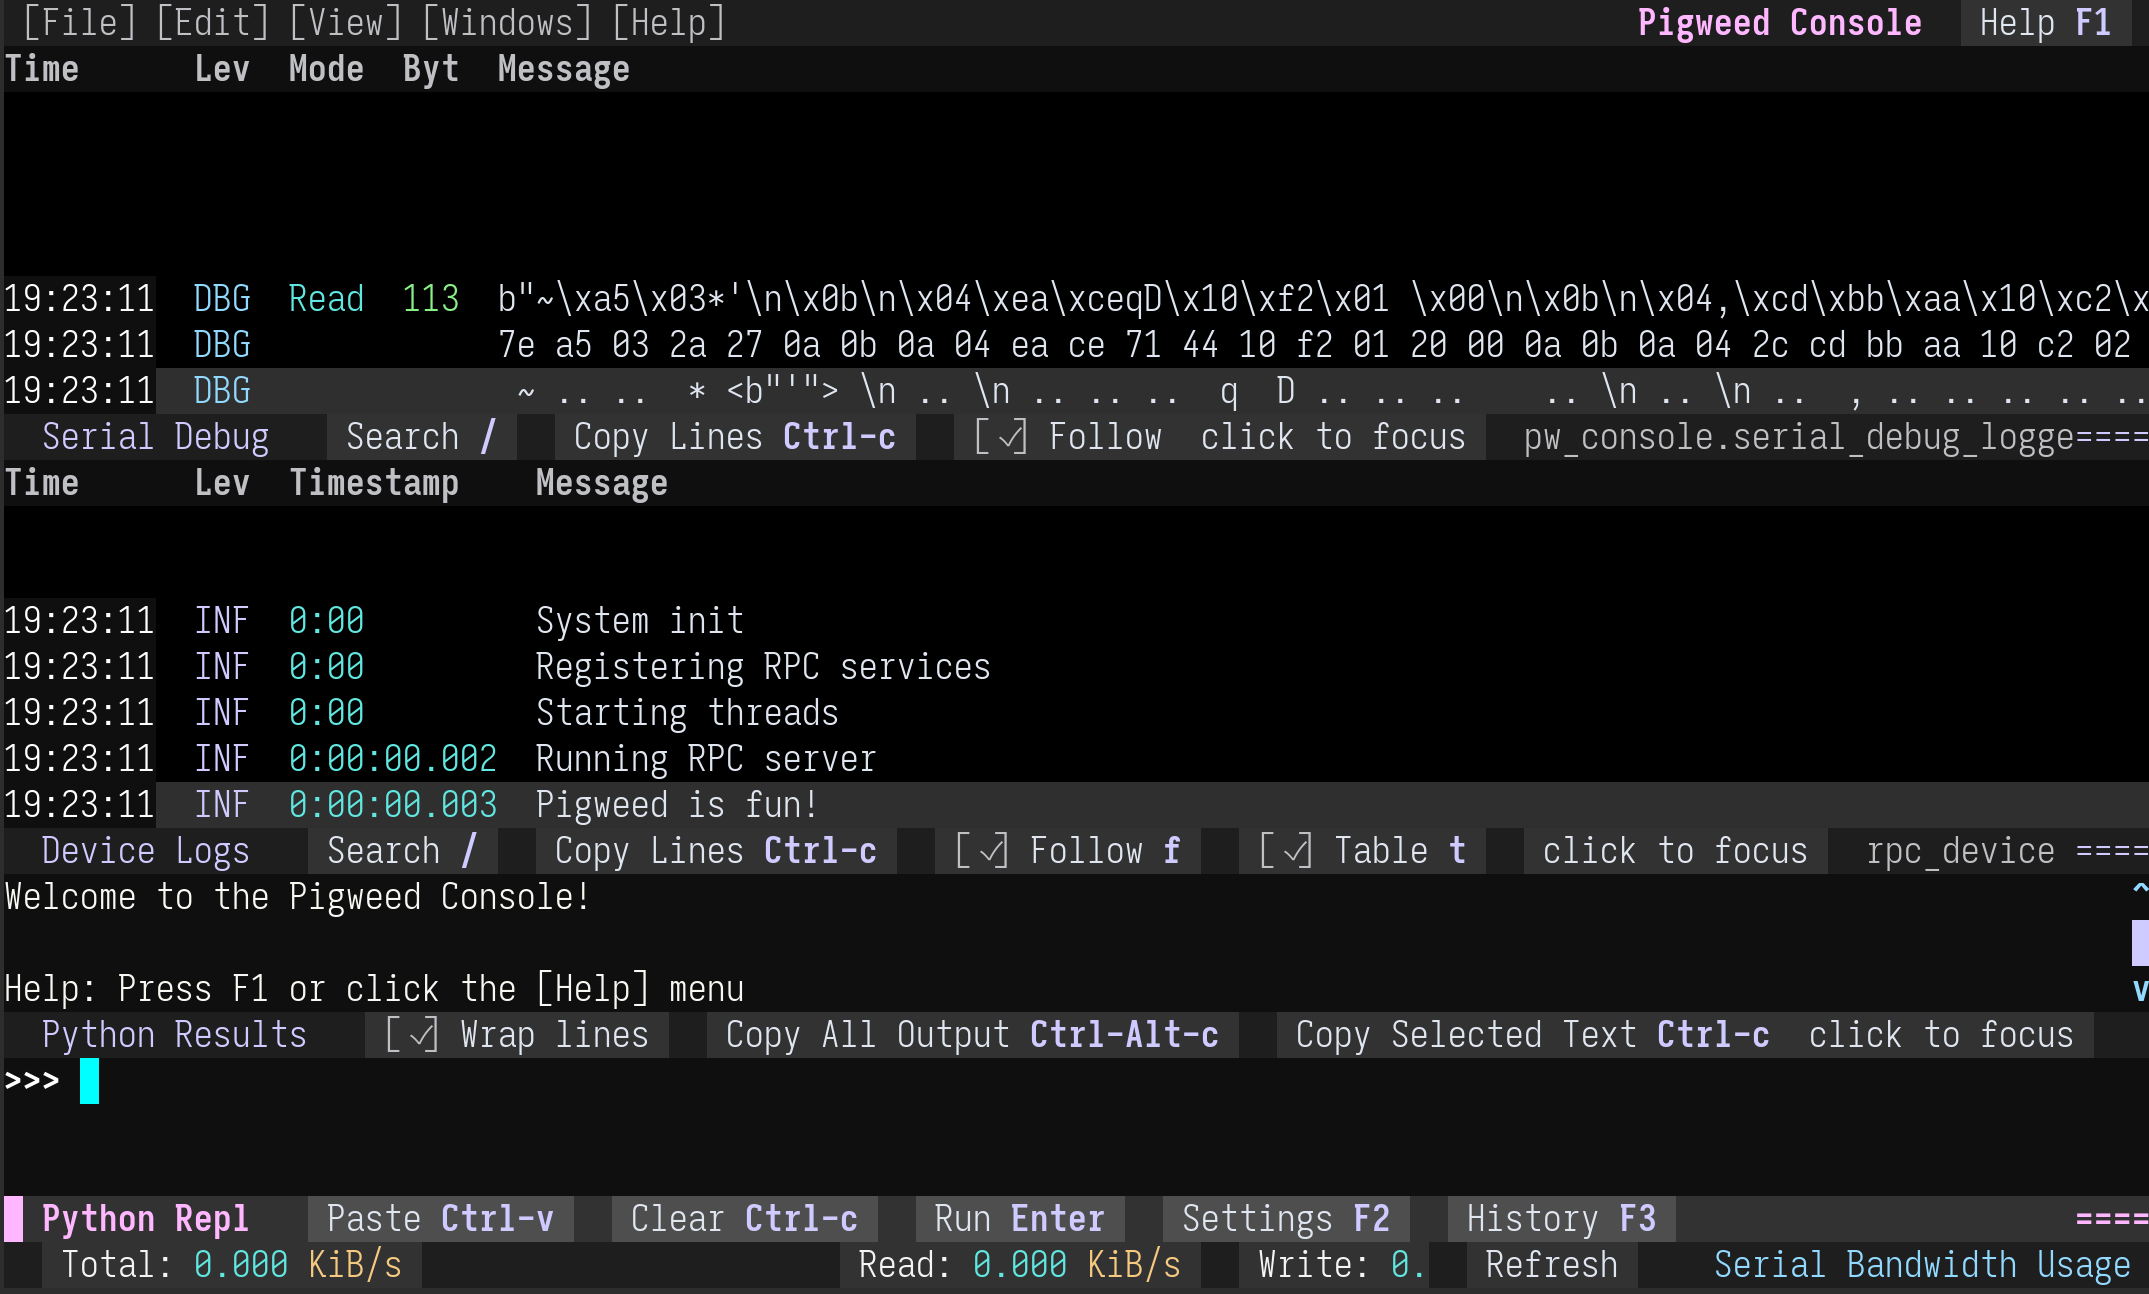 Pigweed Console screenshot with serial debug log messages.